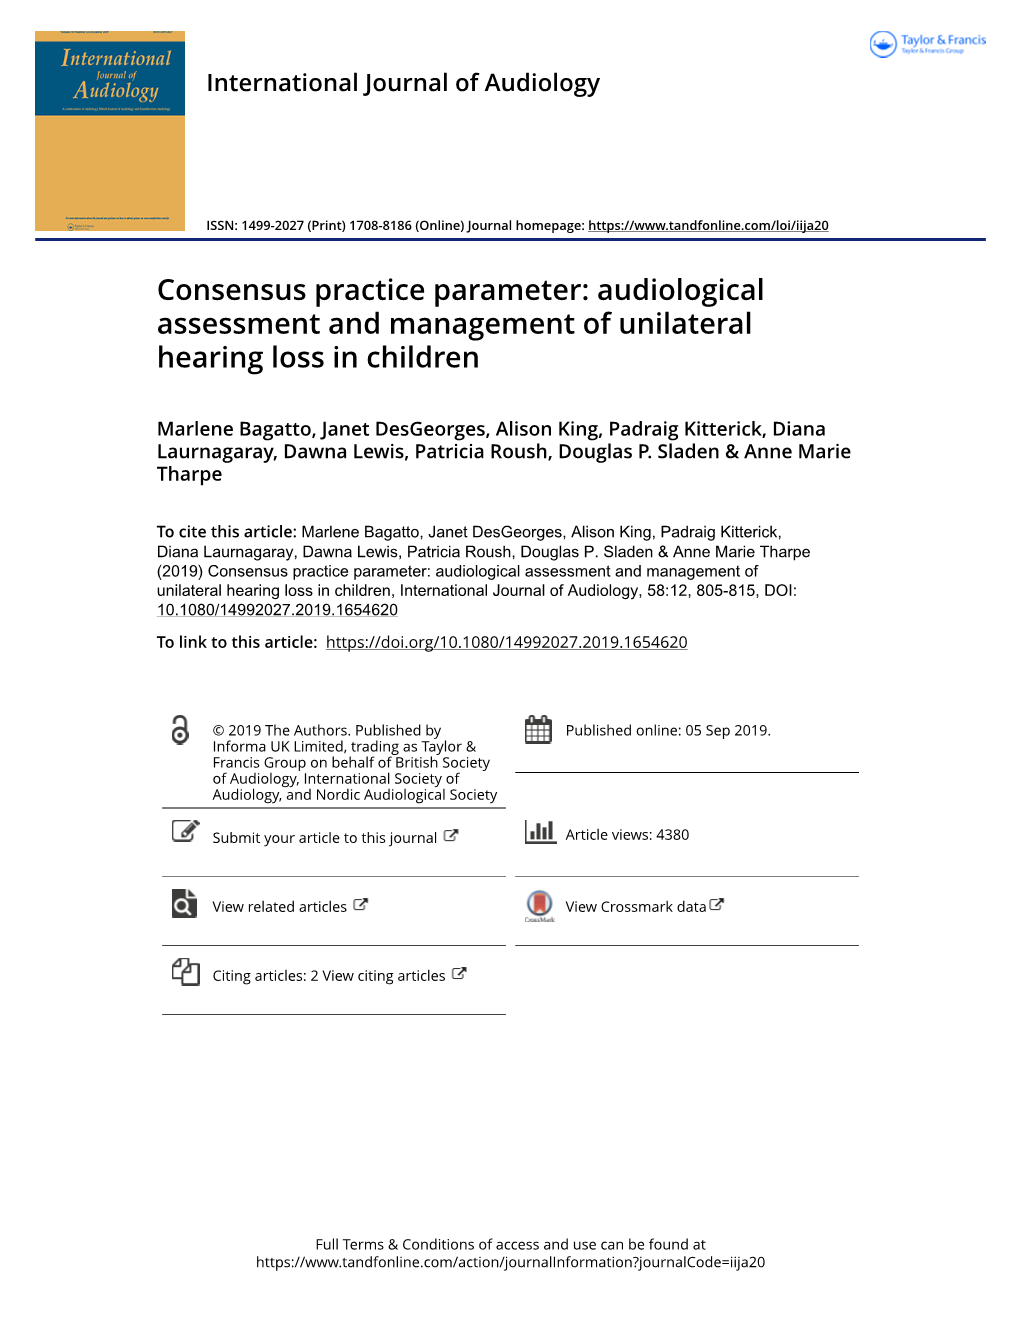 Audiological Assessment and Management of Unilateral Hearing Loss in Children